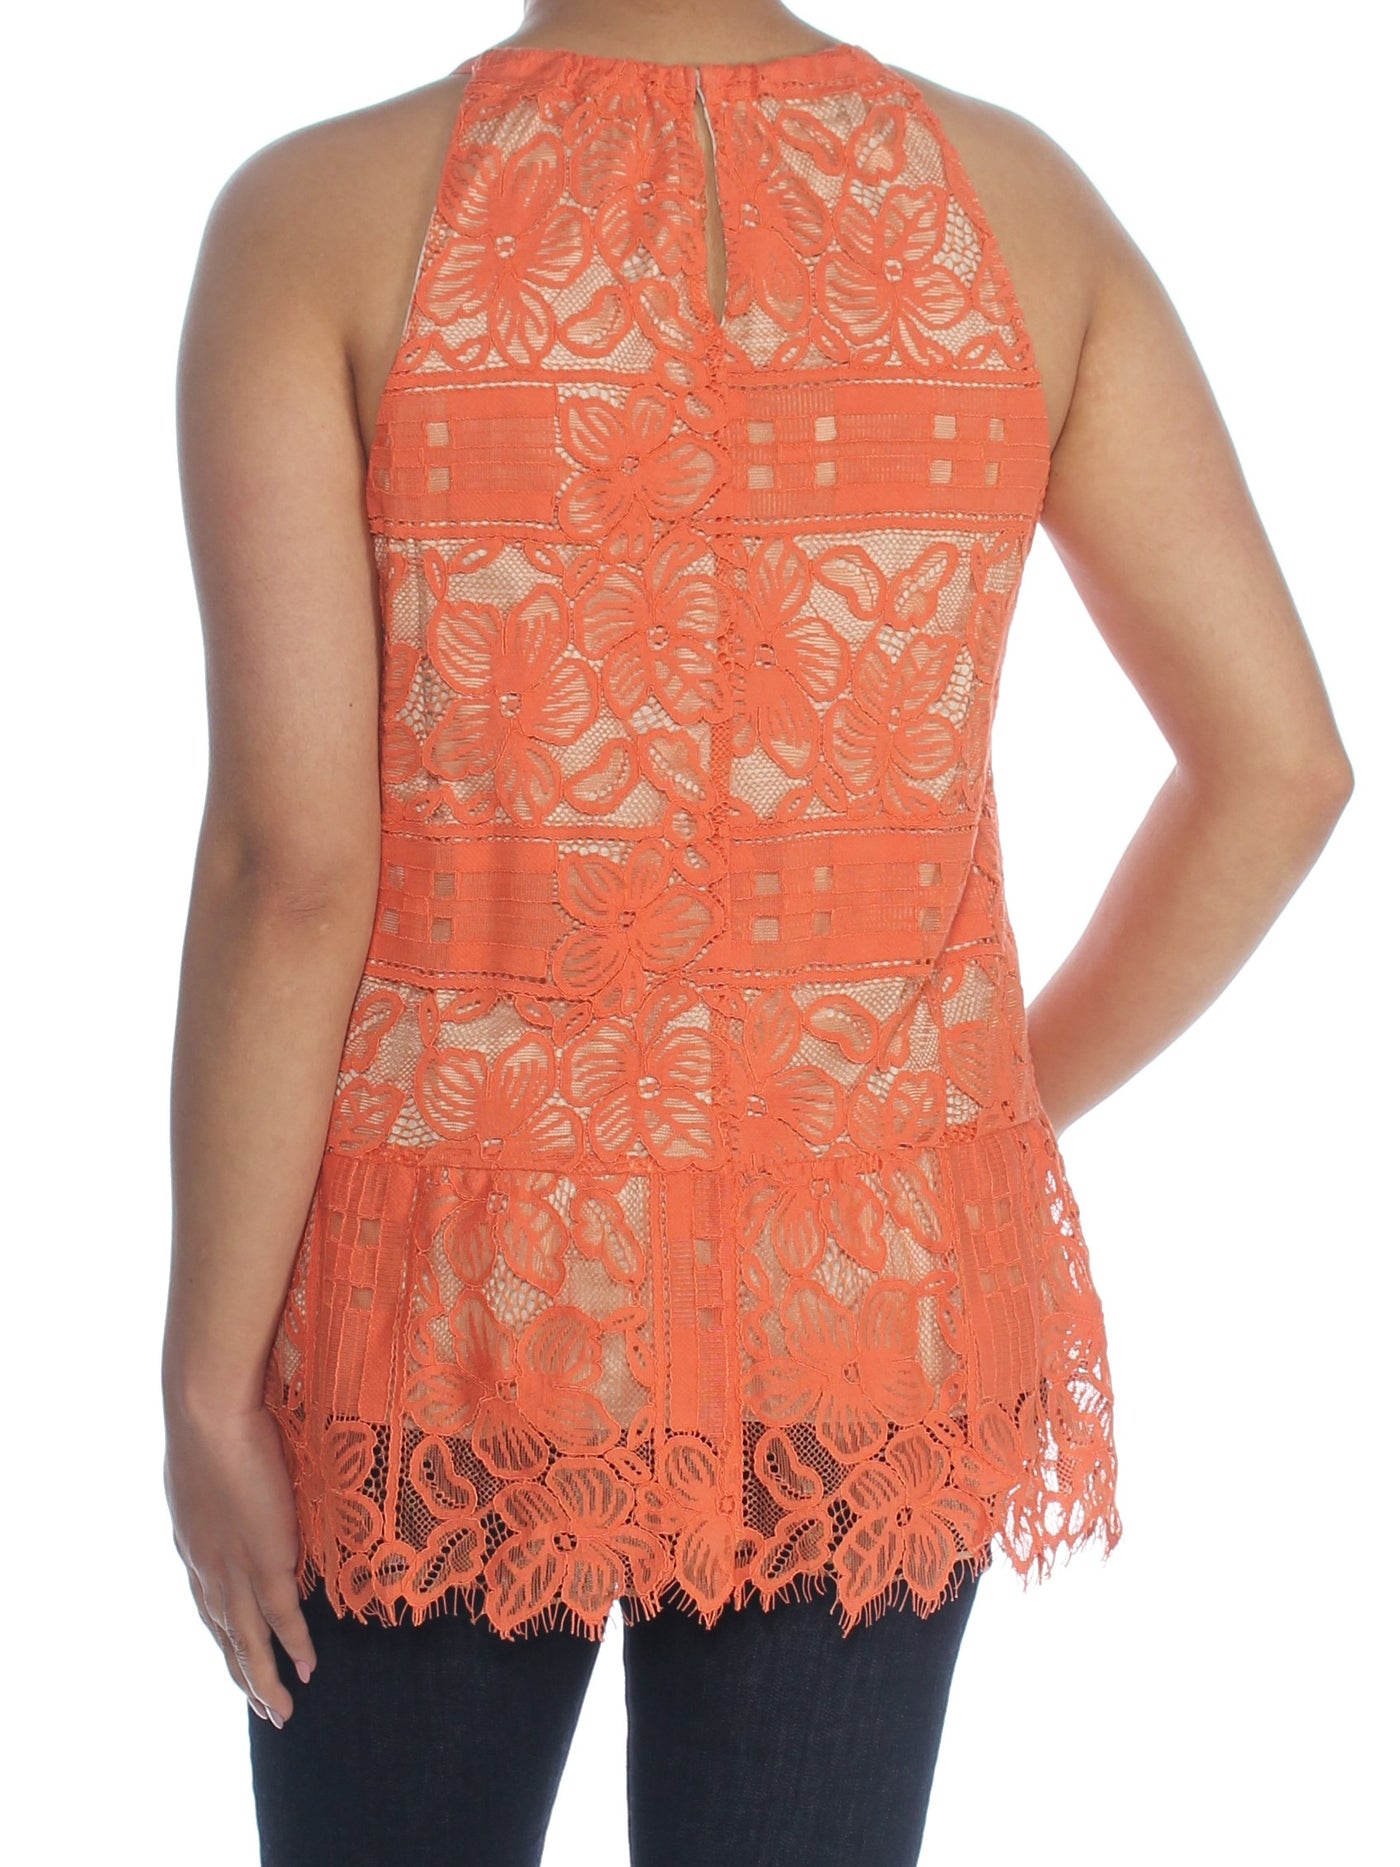 ALFANI Womens Coral Lace Floral Sleeveless Halter Tank Top